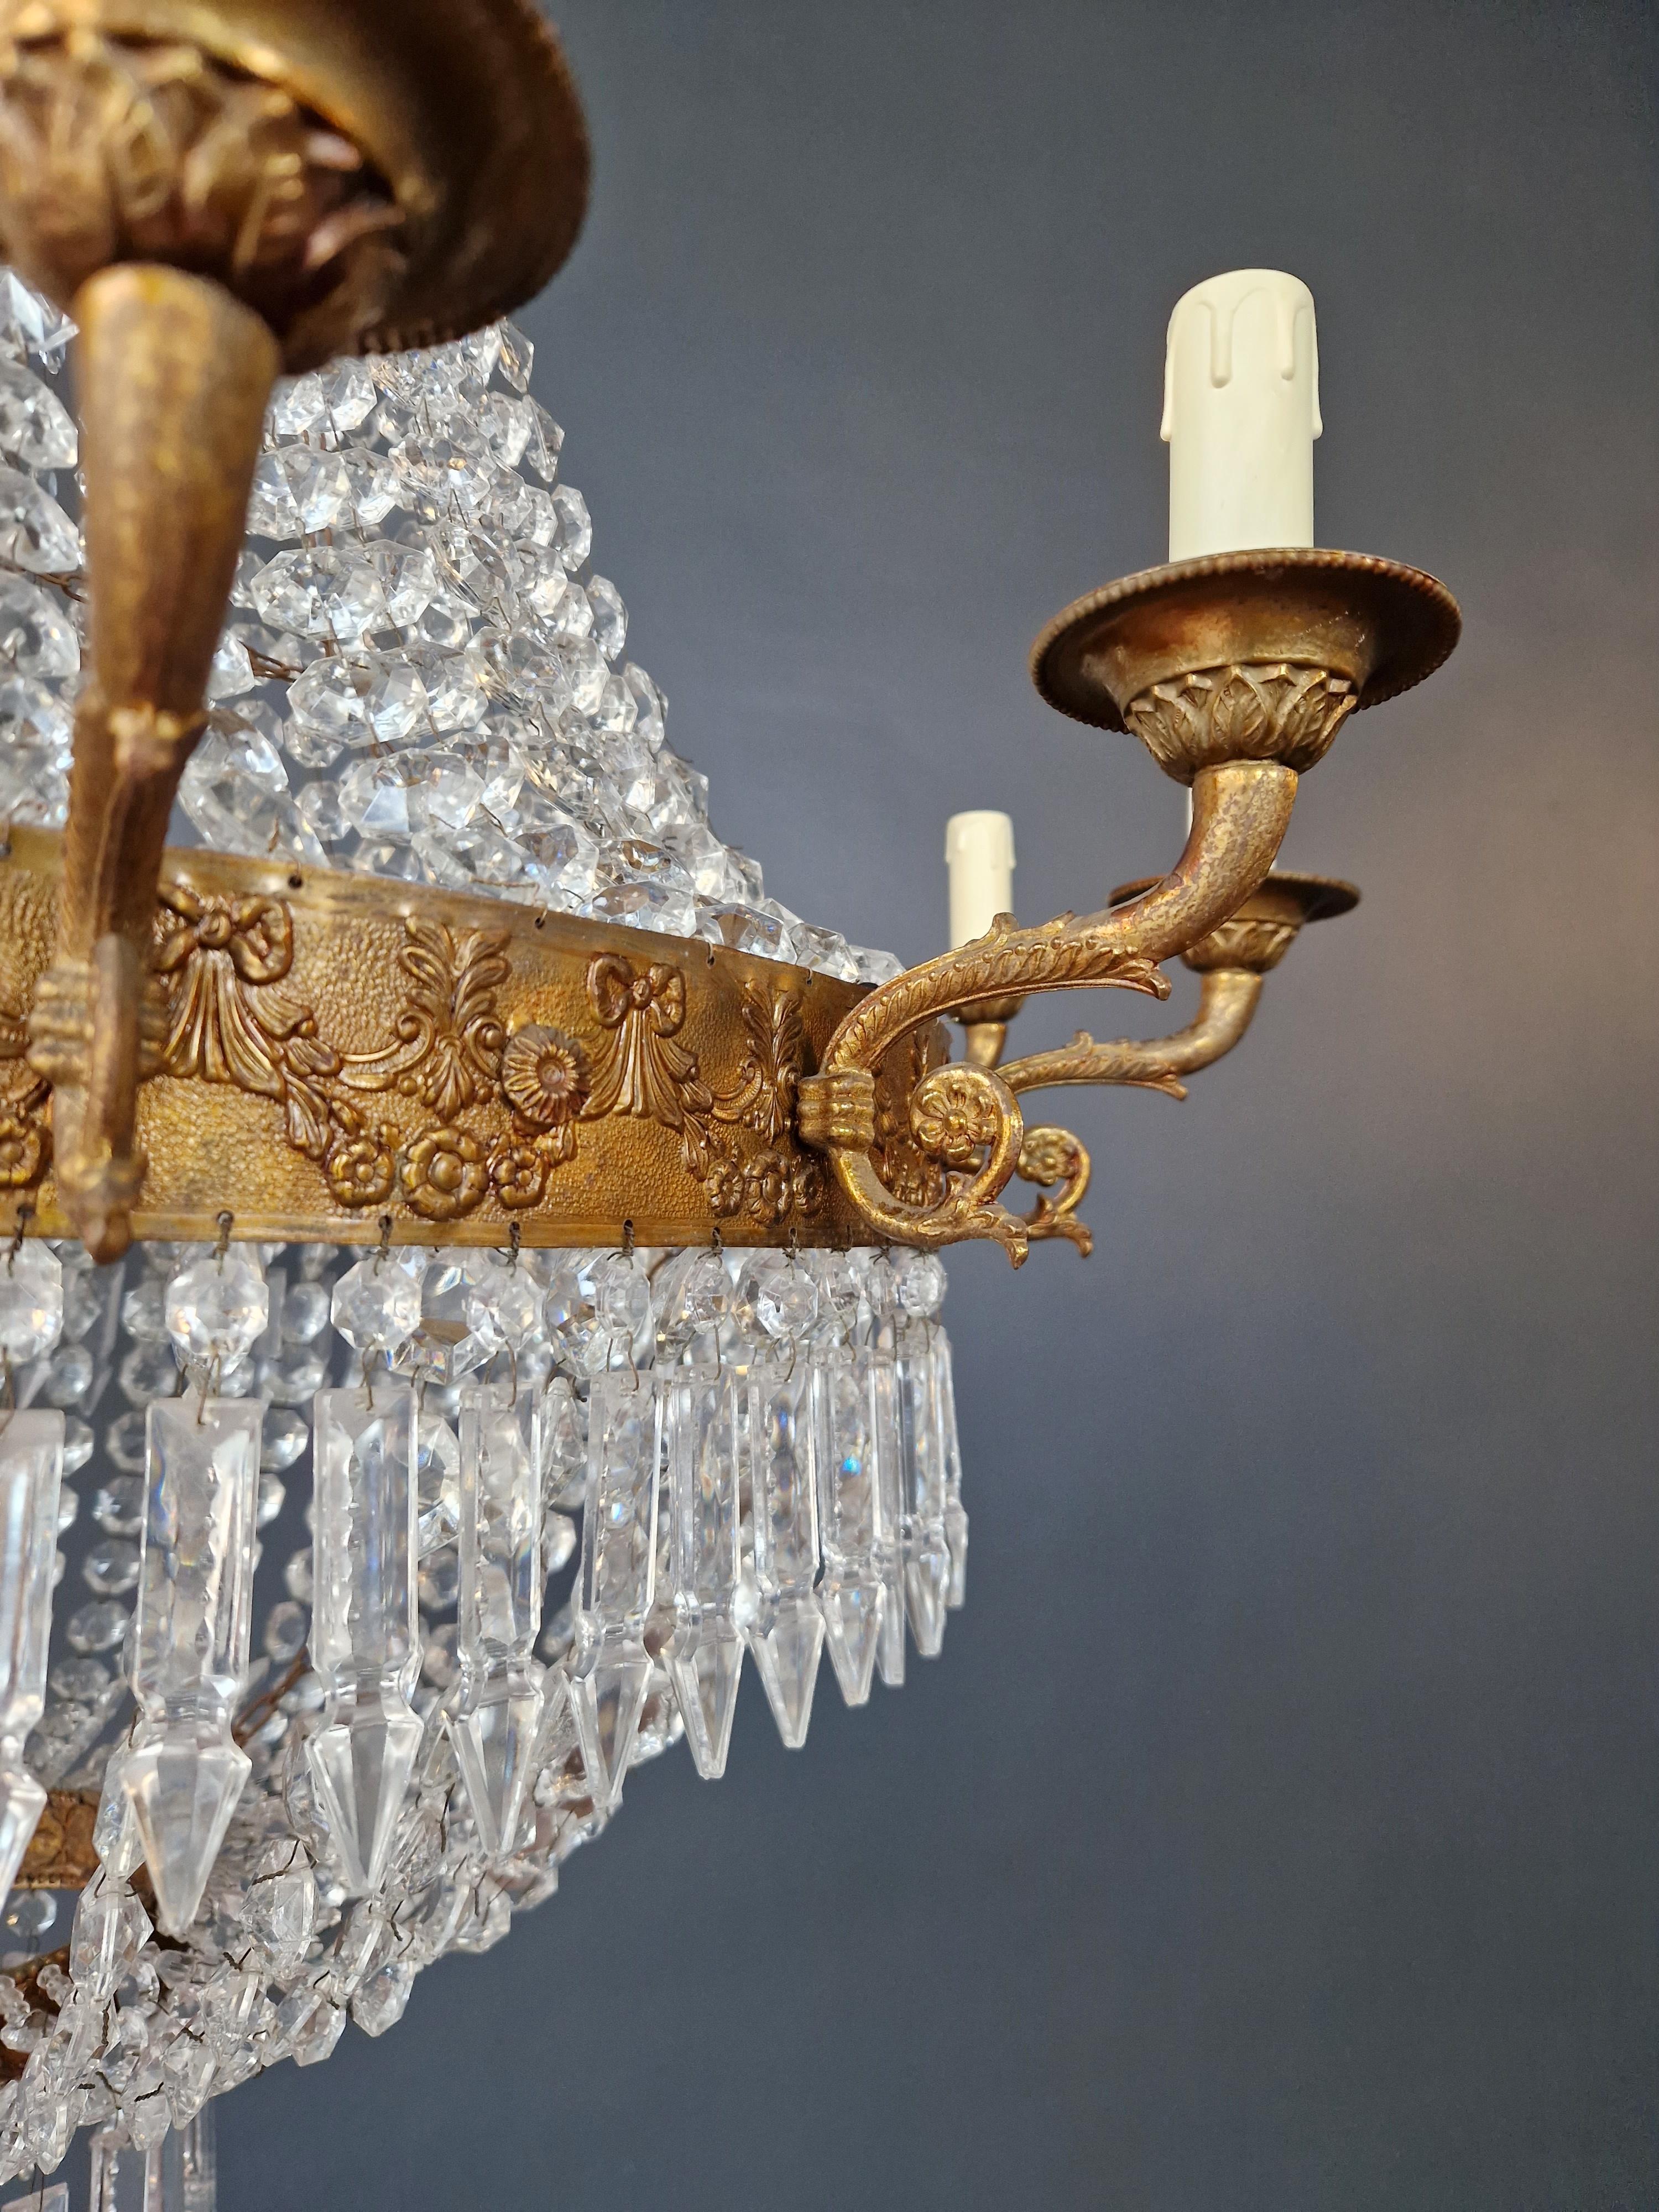 Early 20th Century Empire Brass Chandelier Crystal Lustre Ceiling Light Antique Classical